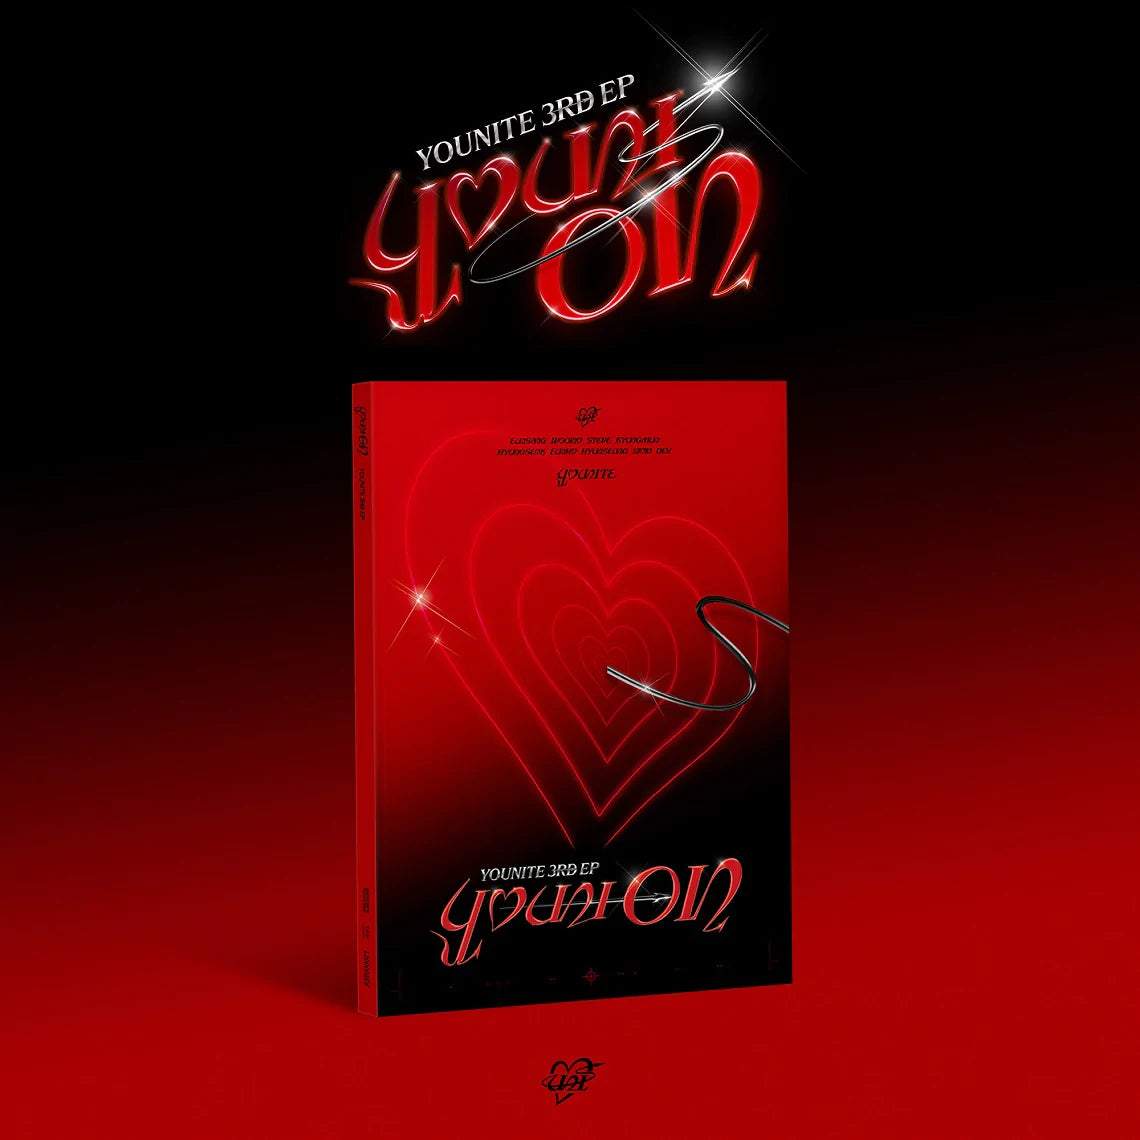 YOUNITE 3RD EP ALBUM 'YOUNI-ON' RED ON VERSION COVER